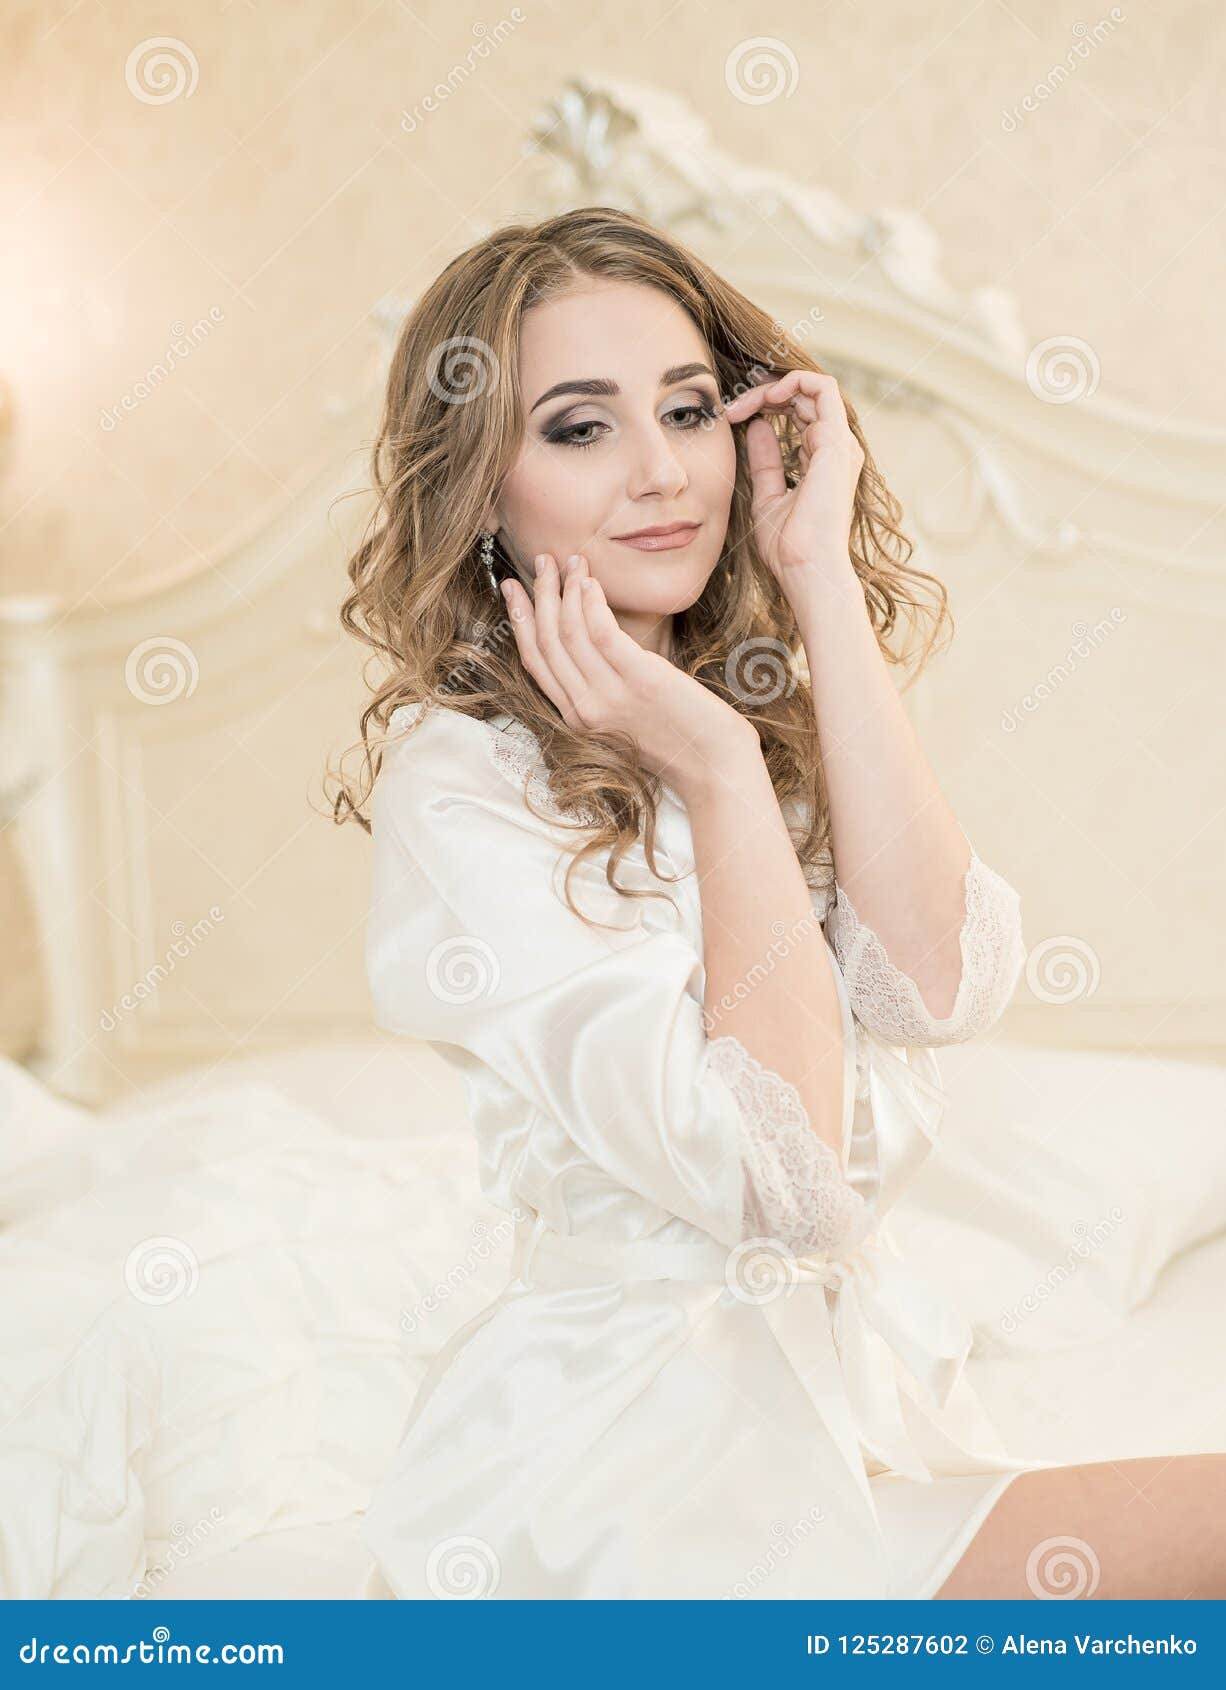 Portrait Of A Young Bride In White Lace Boudoir With Wavy